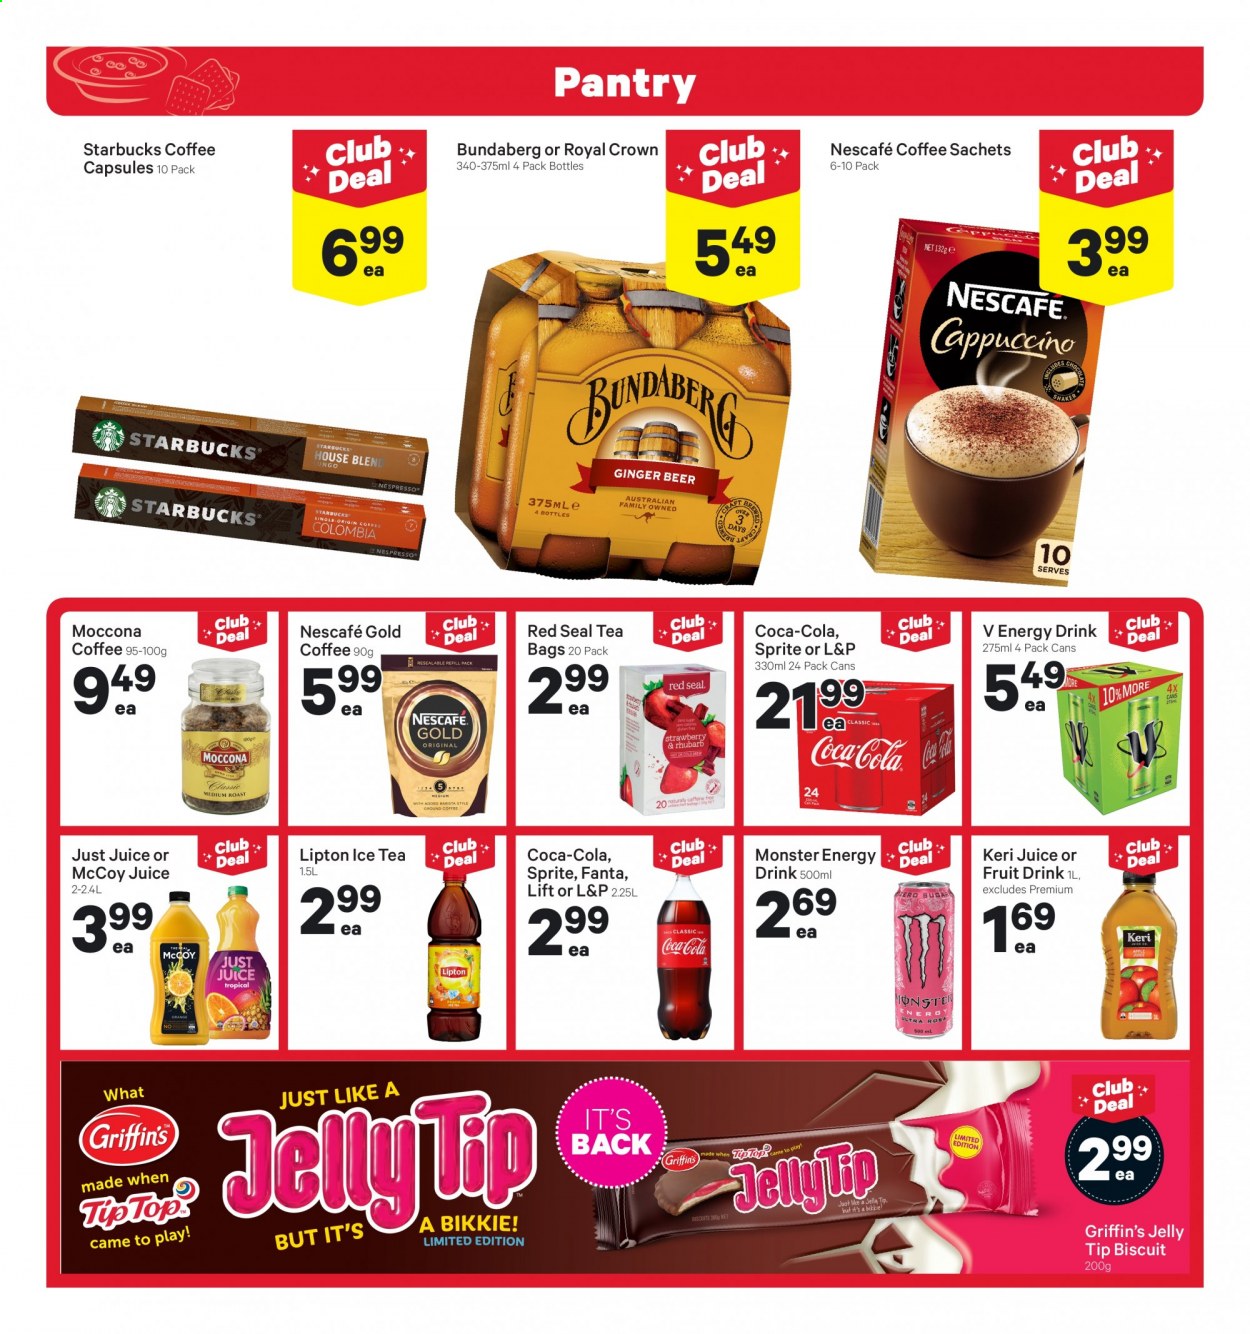 thumbnail - New World mailer - 22.02.2021 - 28.02.2021 - Sales products - ginger beer, rhubarb, oranges, jelly, biscuit, Griffin's, Sprite, juice, energy drink, Monster, Lipton, Fanta, fruit drink, Royal Crown, L&P, Monster Energy, Bundaberg, tea, cappuccino, coffee, Nescafé, ground coffee, Moccona, Starbucks, beer, Keri. Page 12.